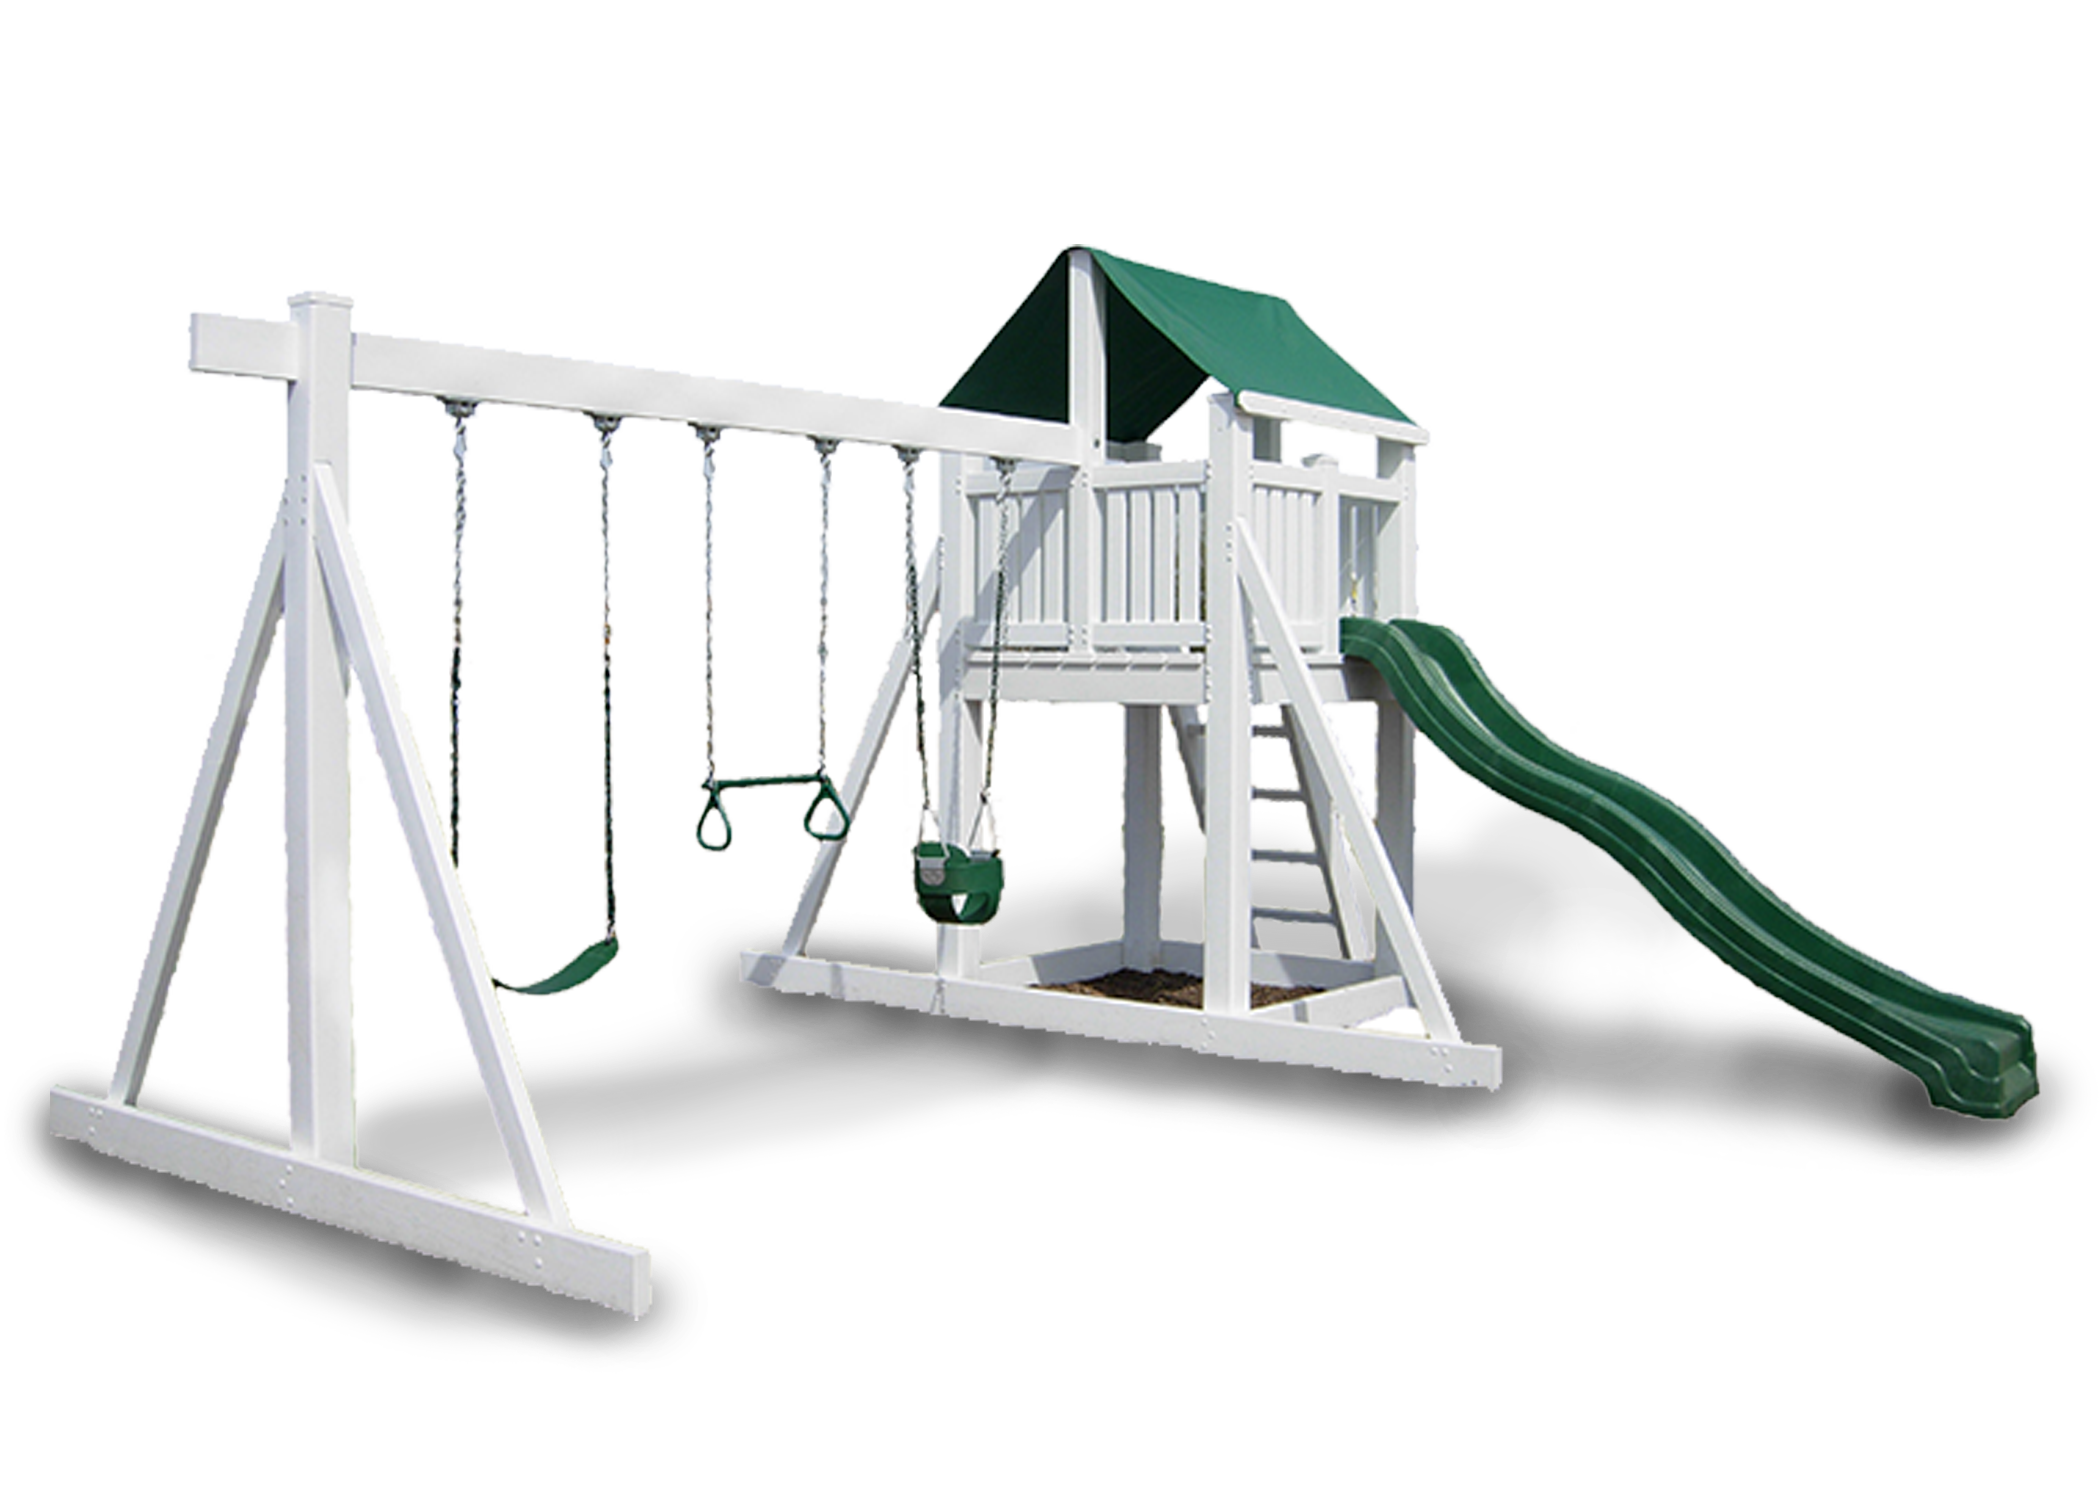 playground clipart play structure